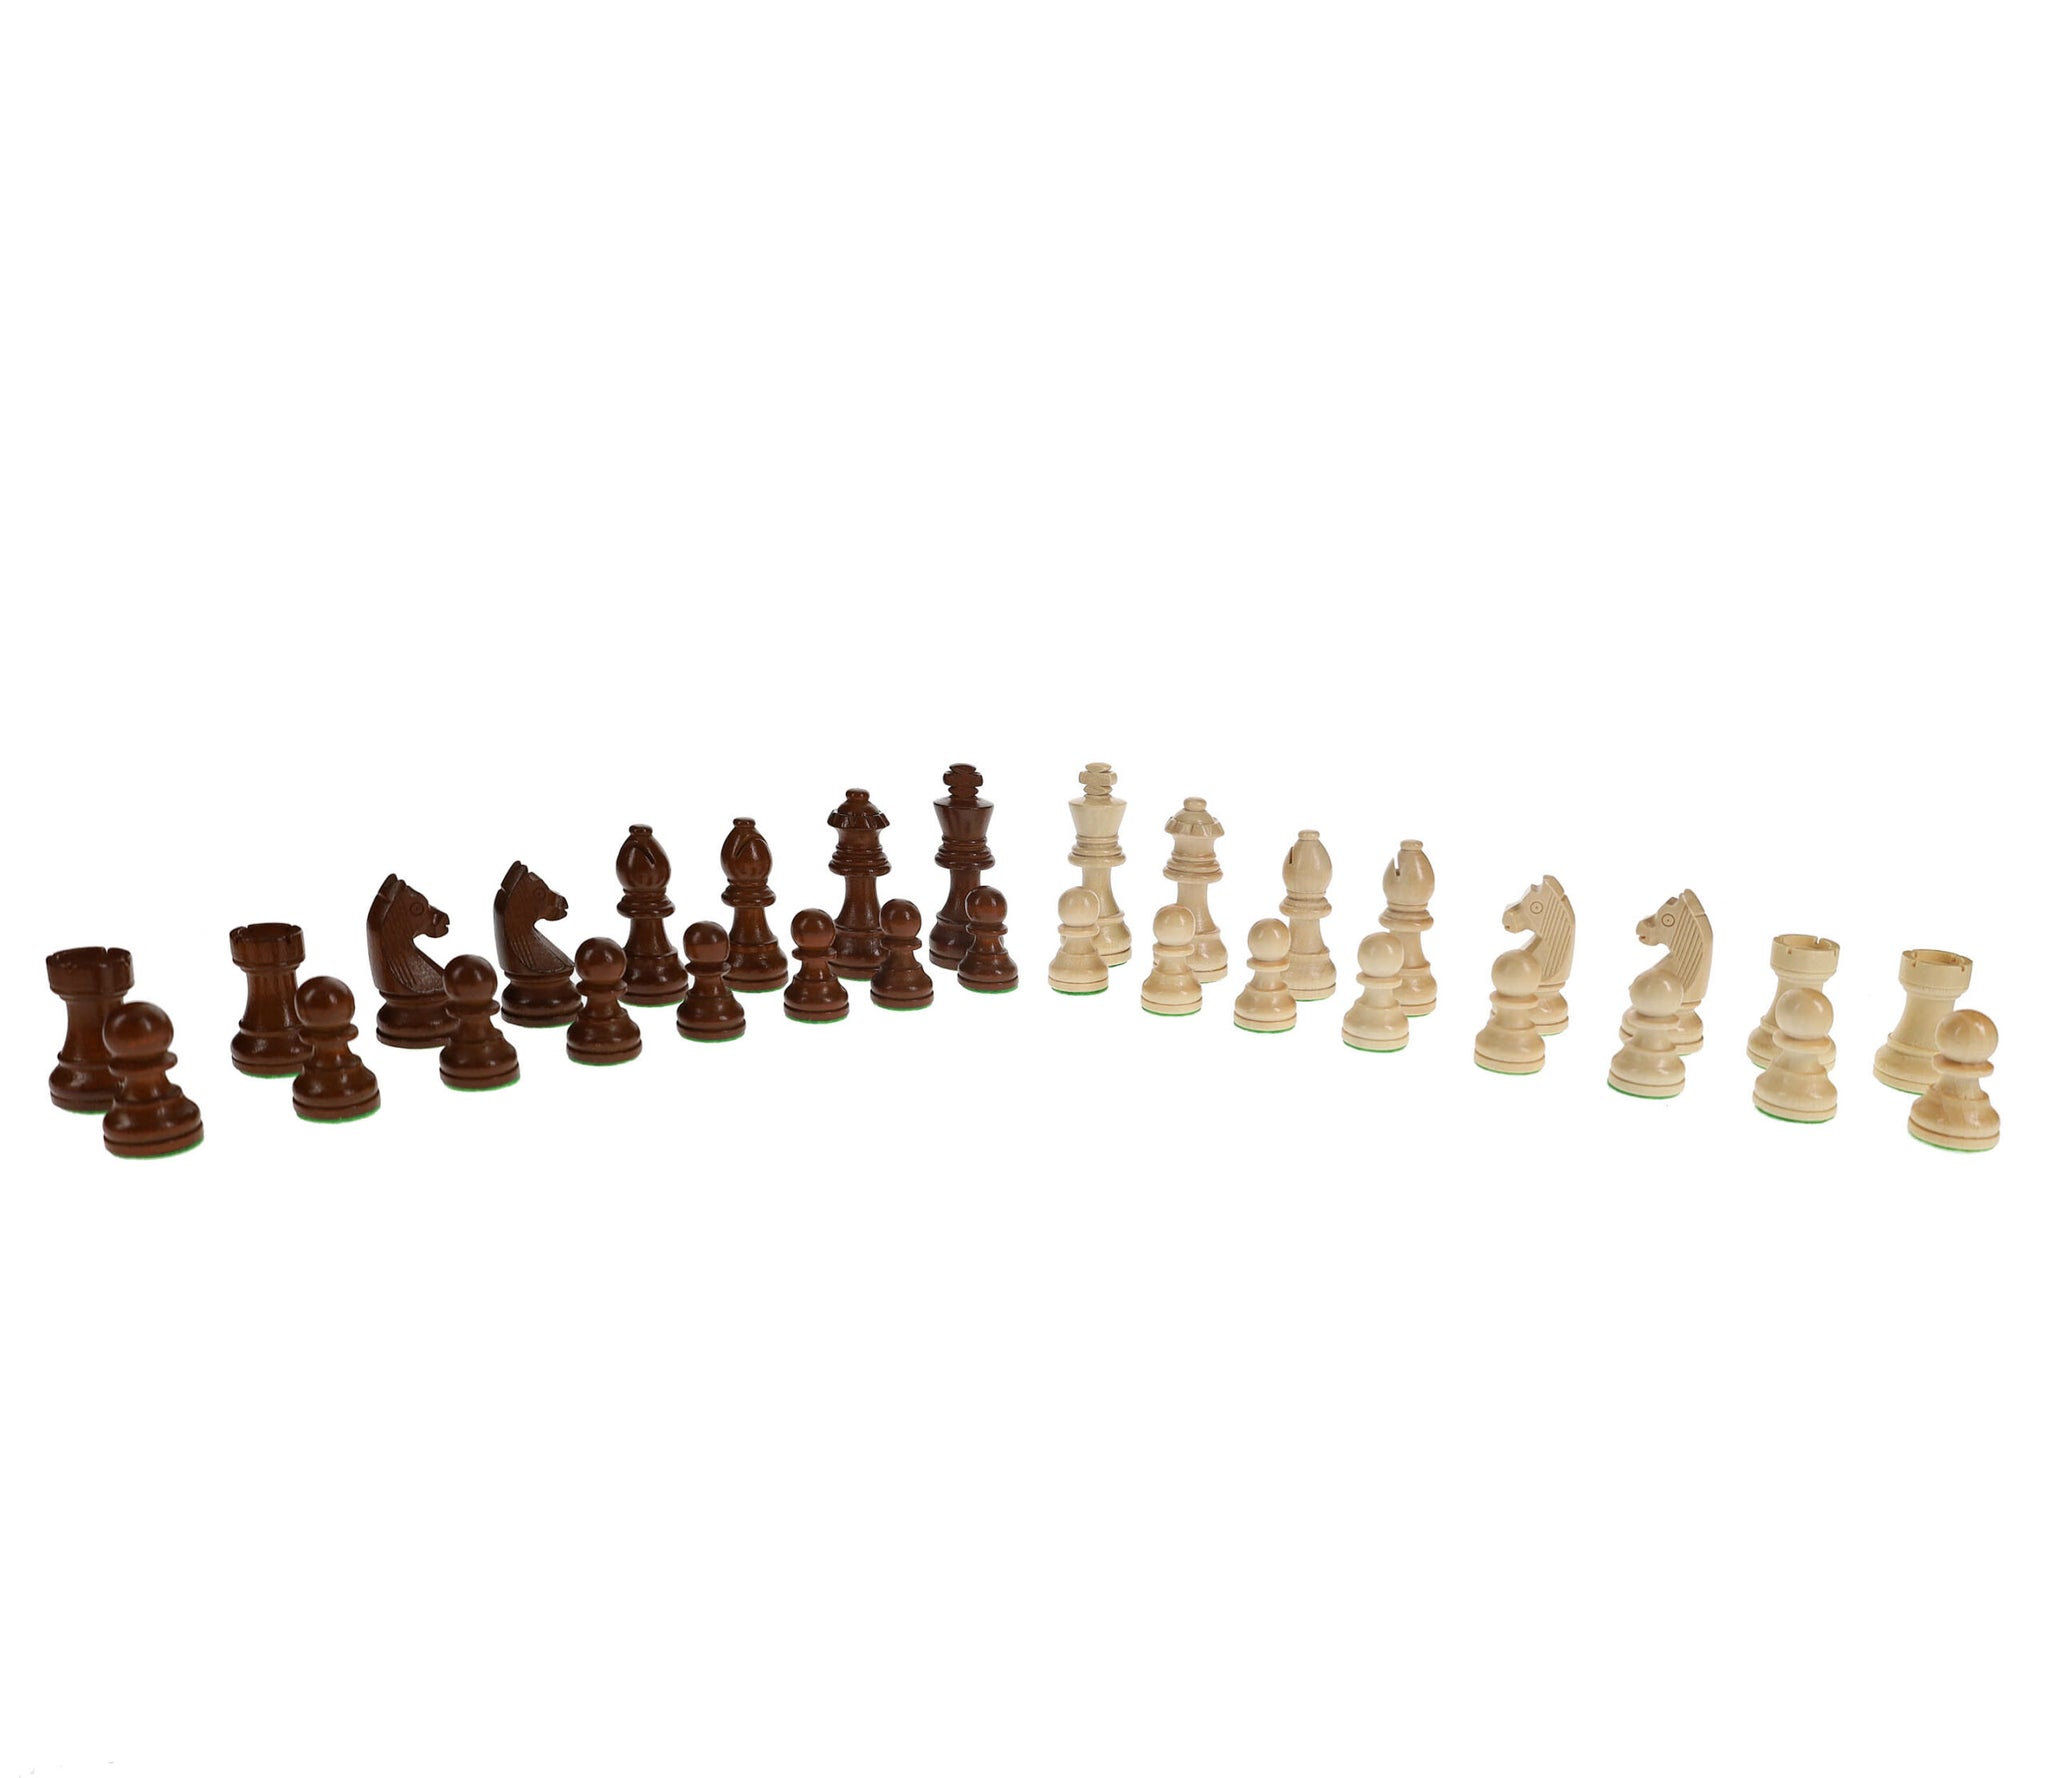  A&A 15 inch Wooden Folding Chess & Checkers Set w/ 3 inch King  Height Staunton Chess Pieces / 2 Extra Queens / 2 in 1 Board Game : Toys &  Games